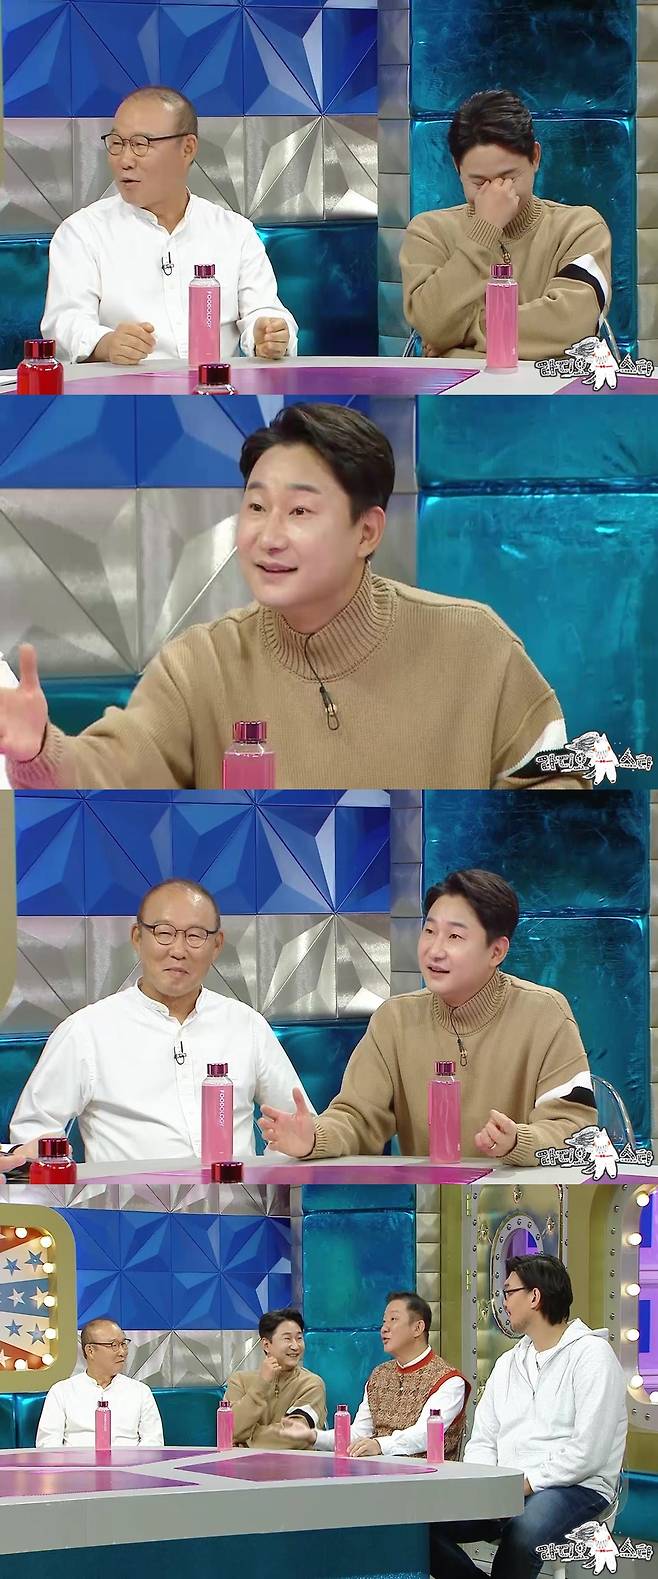 MBC Radio Star will be featured on Park Hang-seo, Lee Chun-soo, Hur Jae and Ha Seung-jin.Park Hang-seo is the main player who led the South Korea national soccer team to the World Cup quarter-finals by assisting former national team coach Guus Hiddink at the 2002 FIFA Korea-Japan World Cup.Since then, he has been the head coach of the Vietnamese national soccer team since 2017, winning the Southeast Asian Games and finishing second in the AFC U-23, becoming Vietnams national hero.Park Hang-seo, who first visited Radio Star in a recent recording, expressed his impression that he finished his last game as coach of Vietnam national team at the end of last month.I decided to do it for just one year, but I have been in charge for five years and four months, he said.Park Hang-seo revealed that he is called Papa among the players thanks to his strong ties with the players during his time at the helm of the Vietnam national team.Park Hang-seo also drew attention by boasting that he was more popular than the group BTS in Vietnam when he was the coach of the Vietnamese national team.He then revealed the imaginary transcendental gifts he received from the people of Vietnam, making the MCs flicker.In the meantime, Park Hang-seo is curious to say that he has something in common with Paulo Bento, the head of the Korean national team of the  ⁇  2022 FIFA Qatar World Cup.Radio Star also scouted Lee Chun-soo, South Koreas soccer legend and 2002 World Cup quarter-finalist, and he has recently become a mainstream sporter, boasting a talent that goes beyond entertainment programs and YouTube.Lee Chun-soo showed off his crazy presence by claiming to be a daily interpreter for his teacher, Park Hang-seo, especially when he foreshadows a bloody revelation with Park Hang-seo and his relentless attack mode of praise and diss.The full version of the episode will be available on Radio Star, which will be broadcasted at 10:30 pm on the 22nd.Photo = MBC